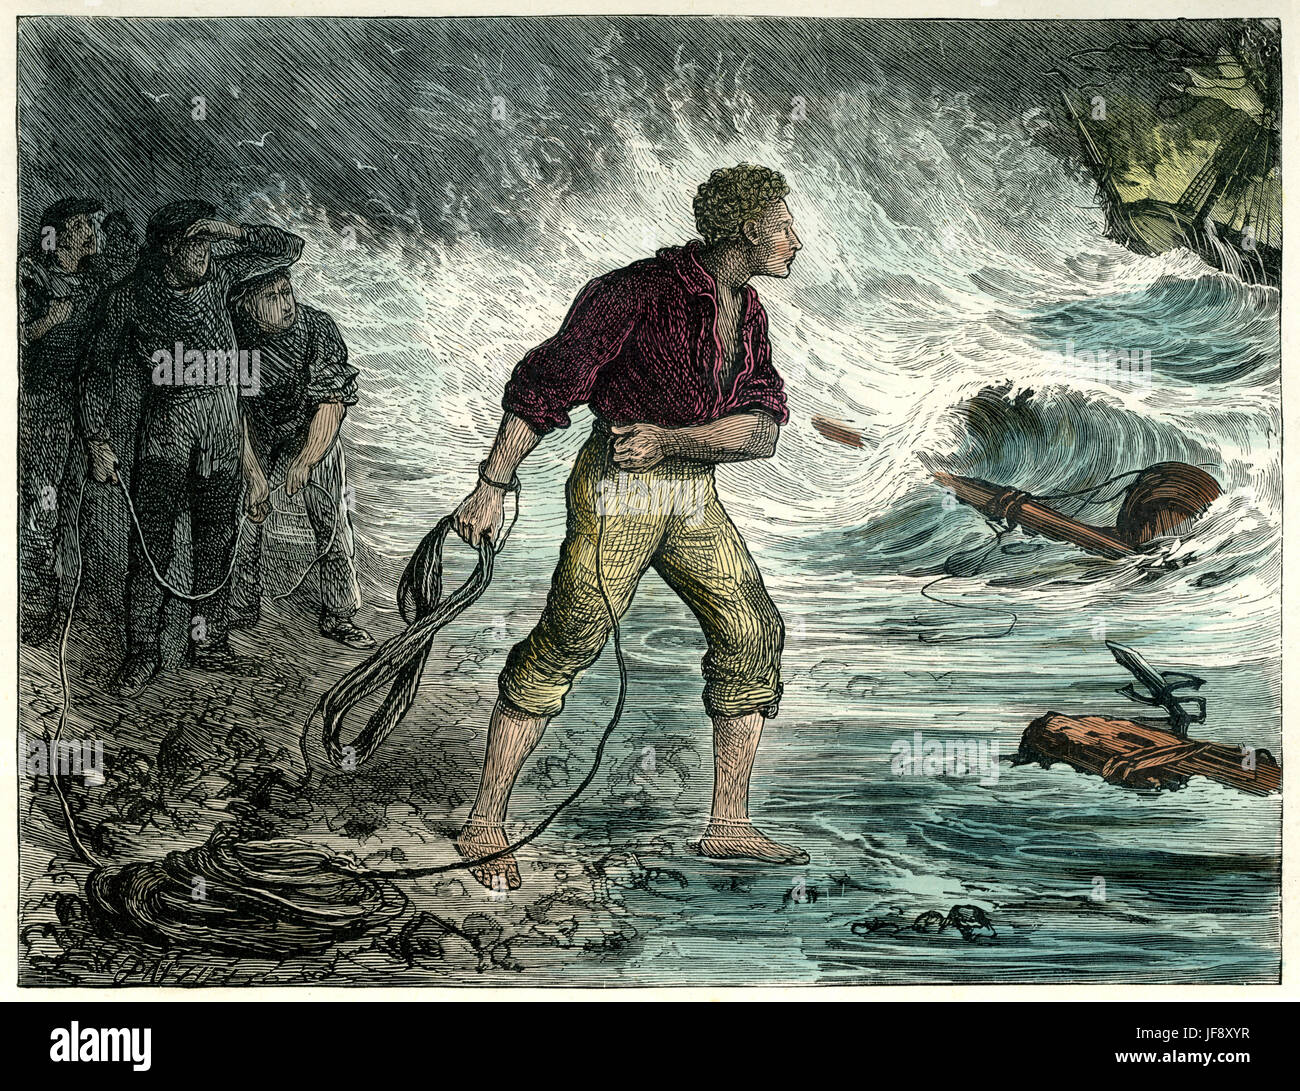 David Copperfield, novel by Charles Dickens (7 February 1812 – 9 June 1870). Chapter 55: Ham swims out into the storm to rescue the Portuguese sailors. Illustration by Fred Barnard (16 May 1846 – 28 September 1896) Stock Photo